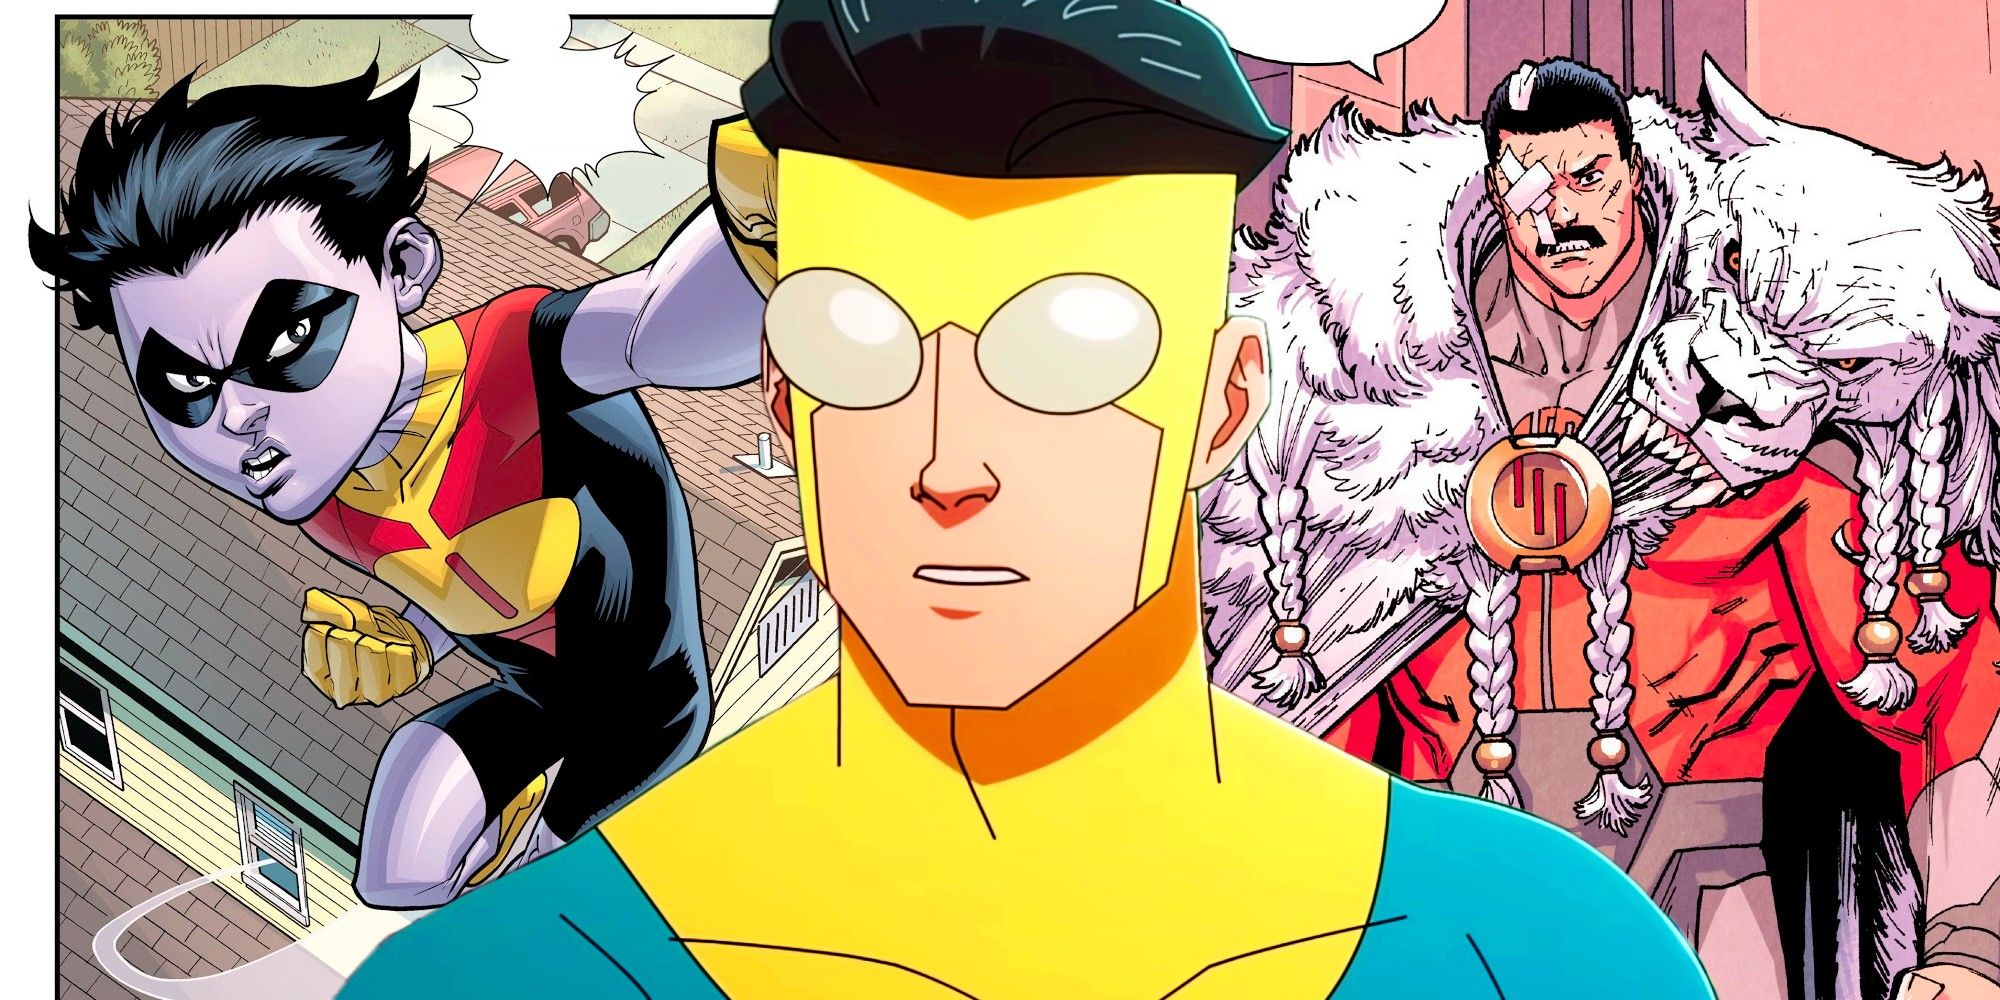 Invincible season 2: The 3 things fans should expect for the